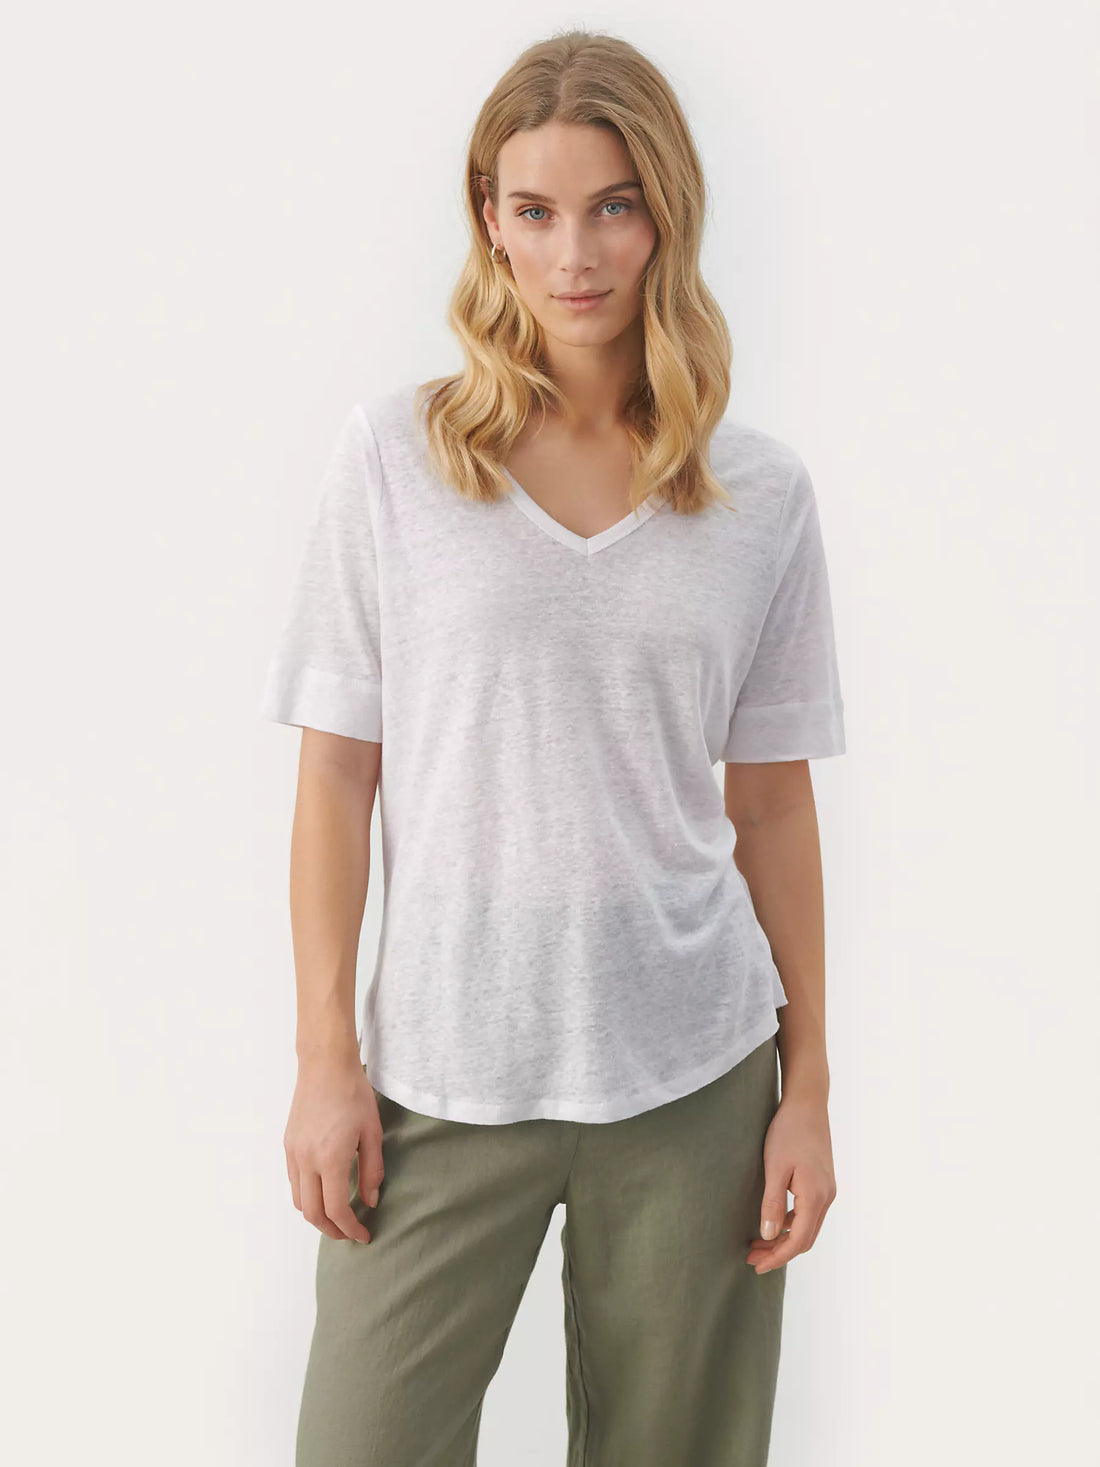 Curlies Linen T-Shirt in Bright White by Part Two at Jessimara.com